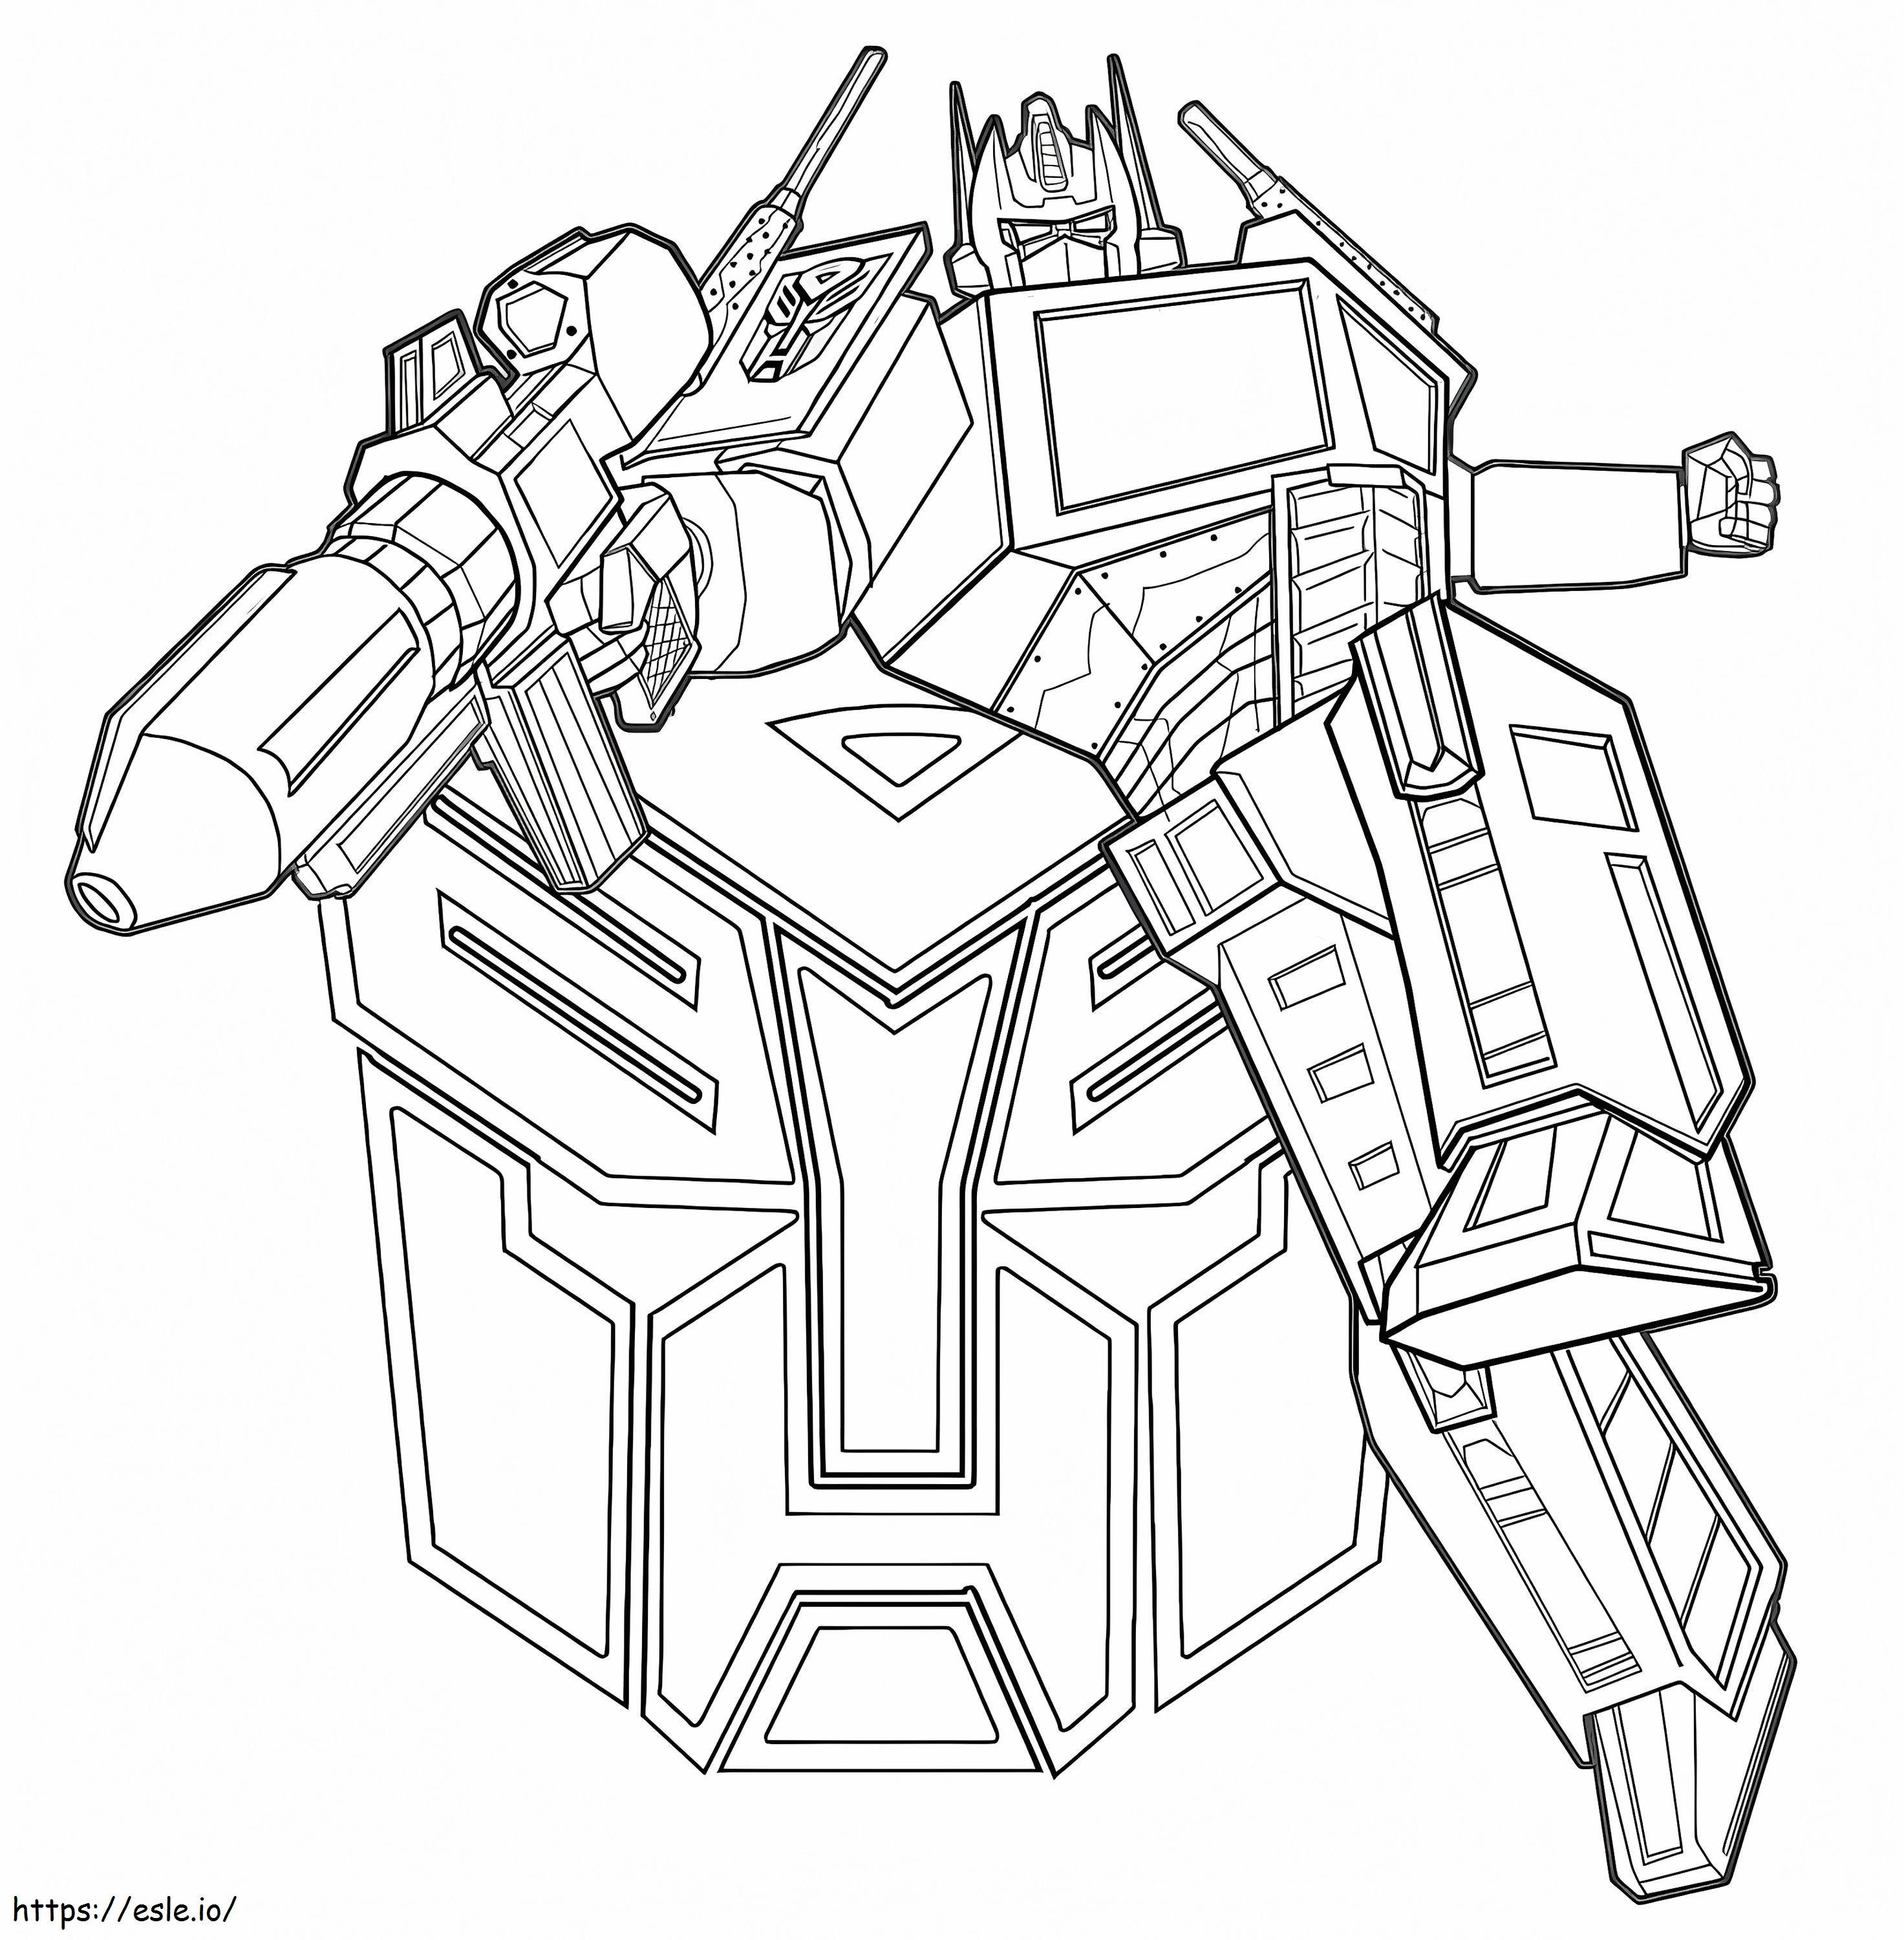 Transformers Prime coloring page